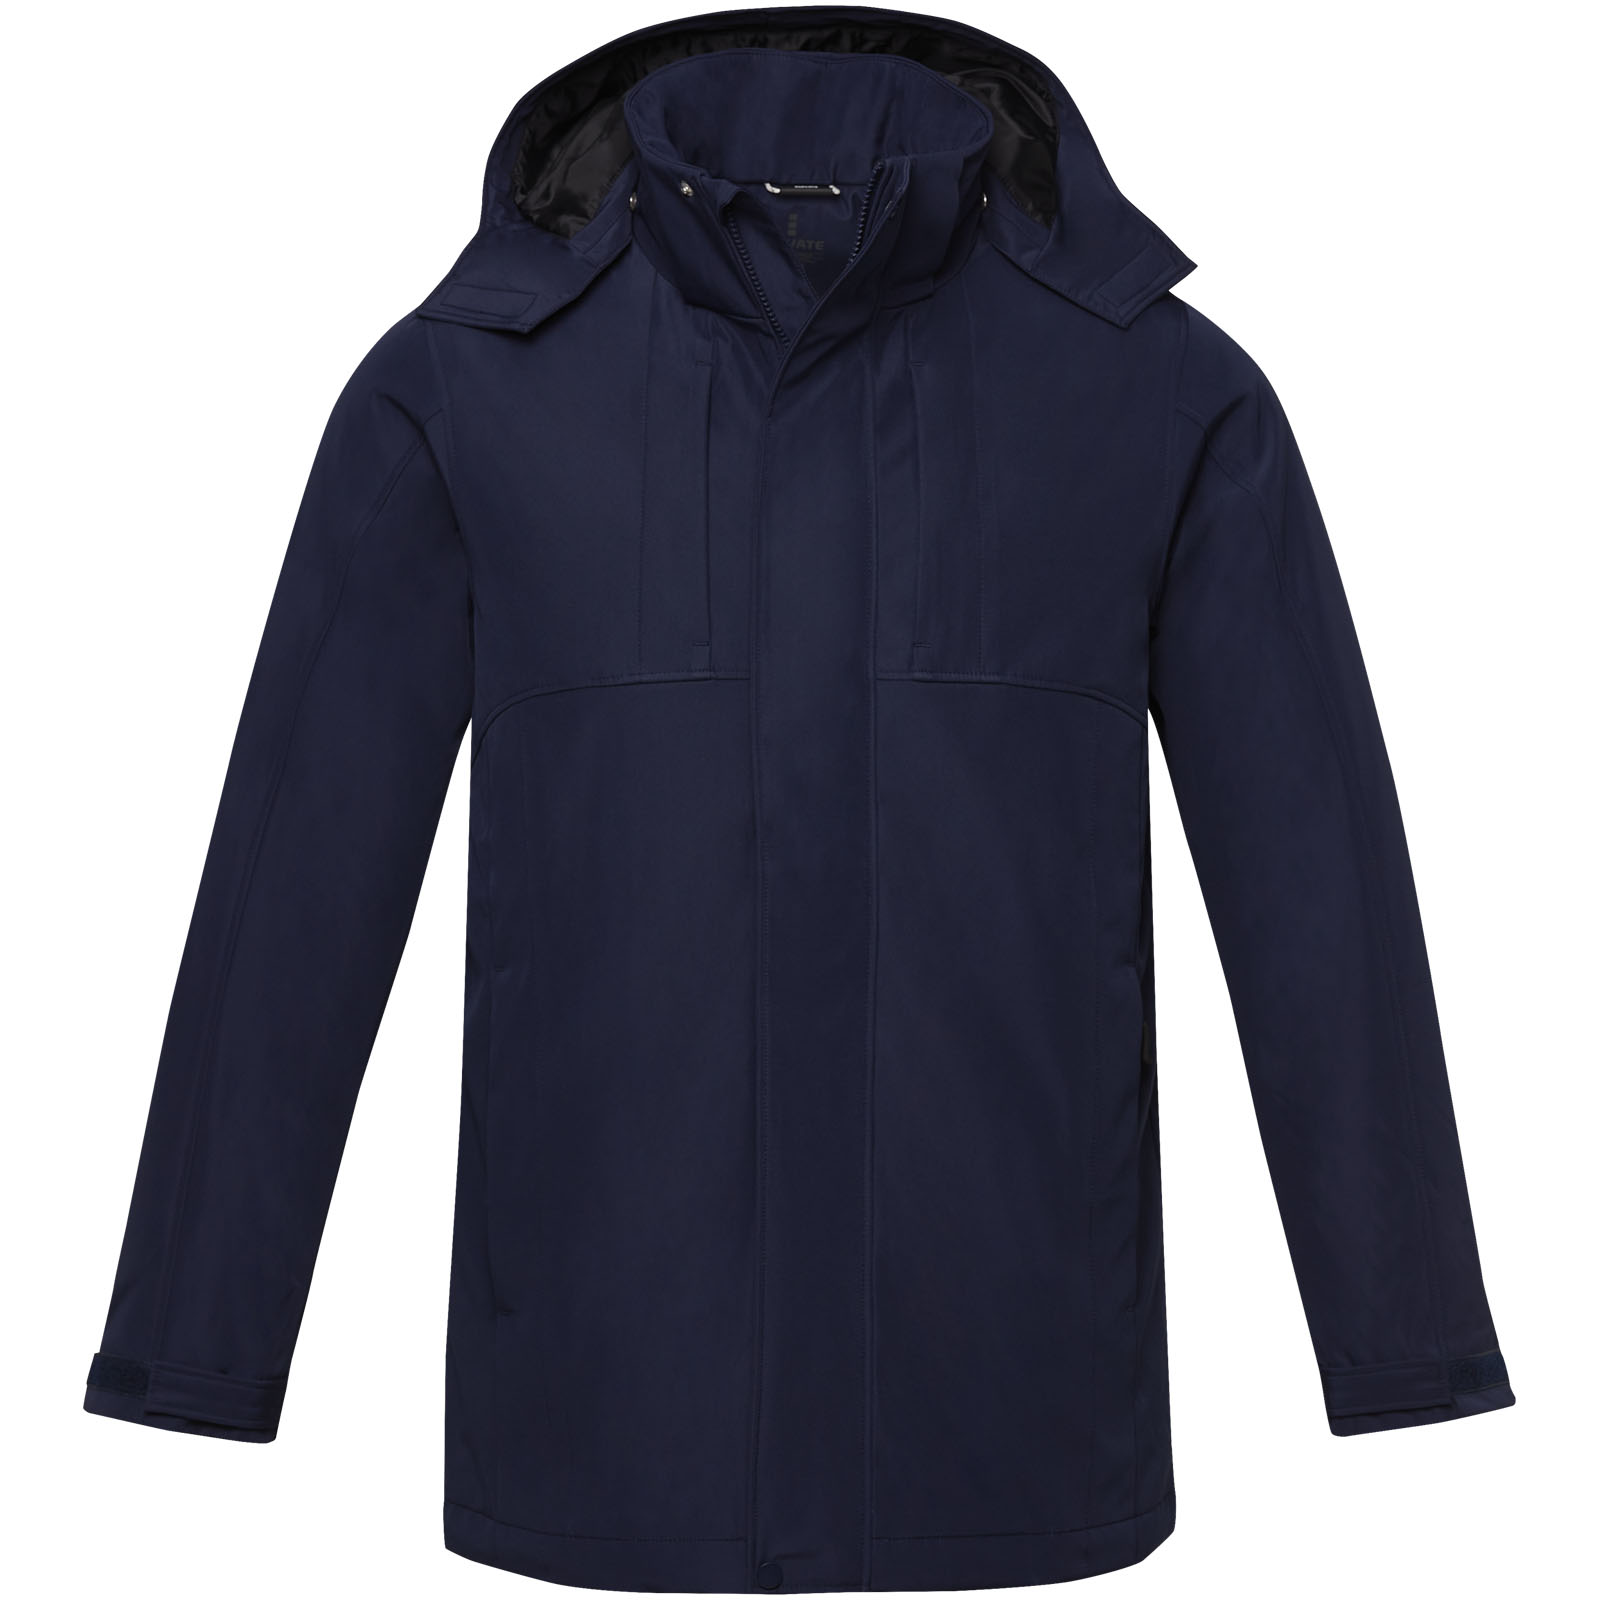 Advertising Jackets - Hardy men's insulated parka - 1